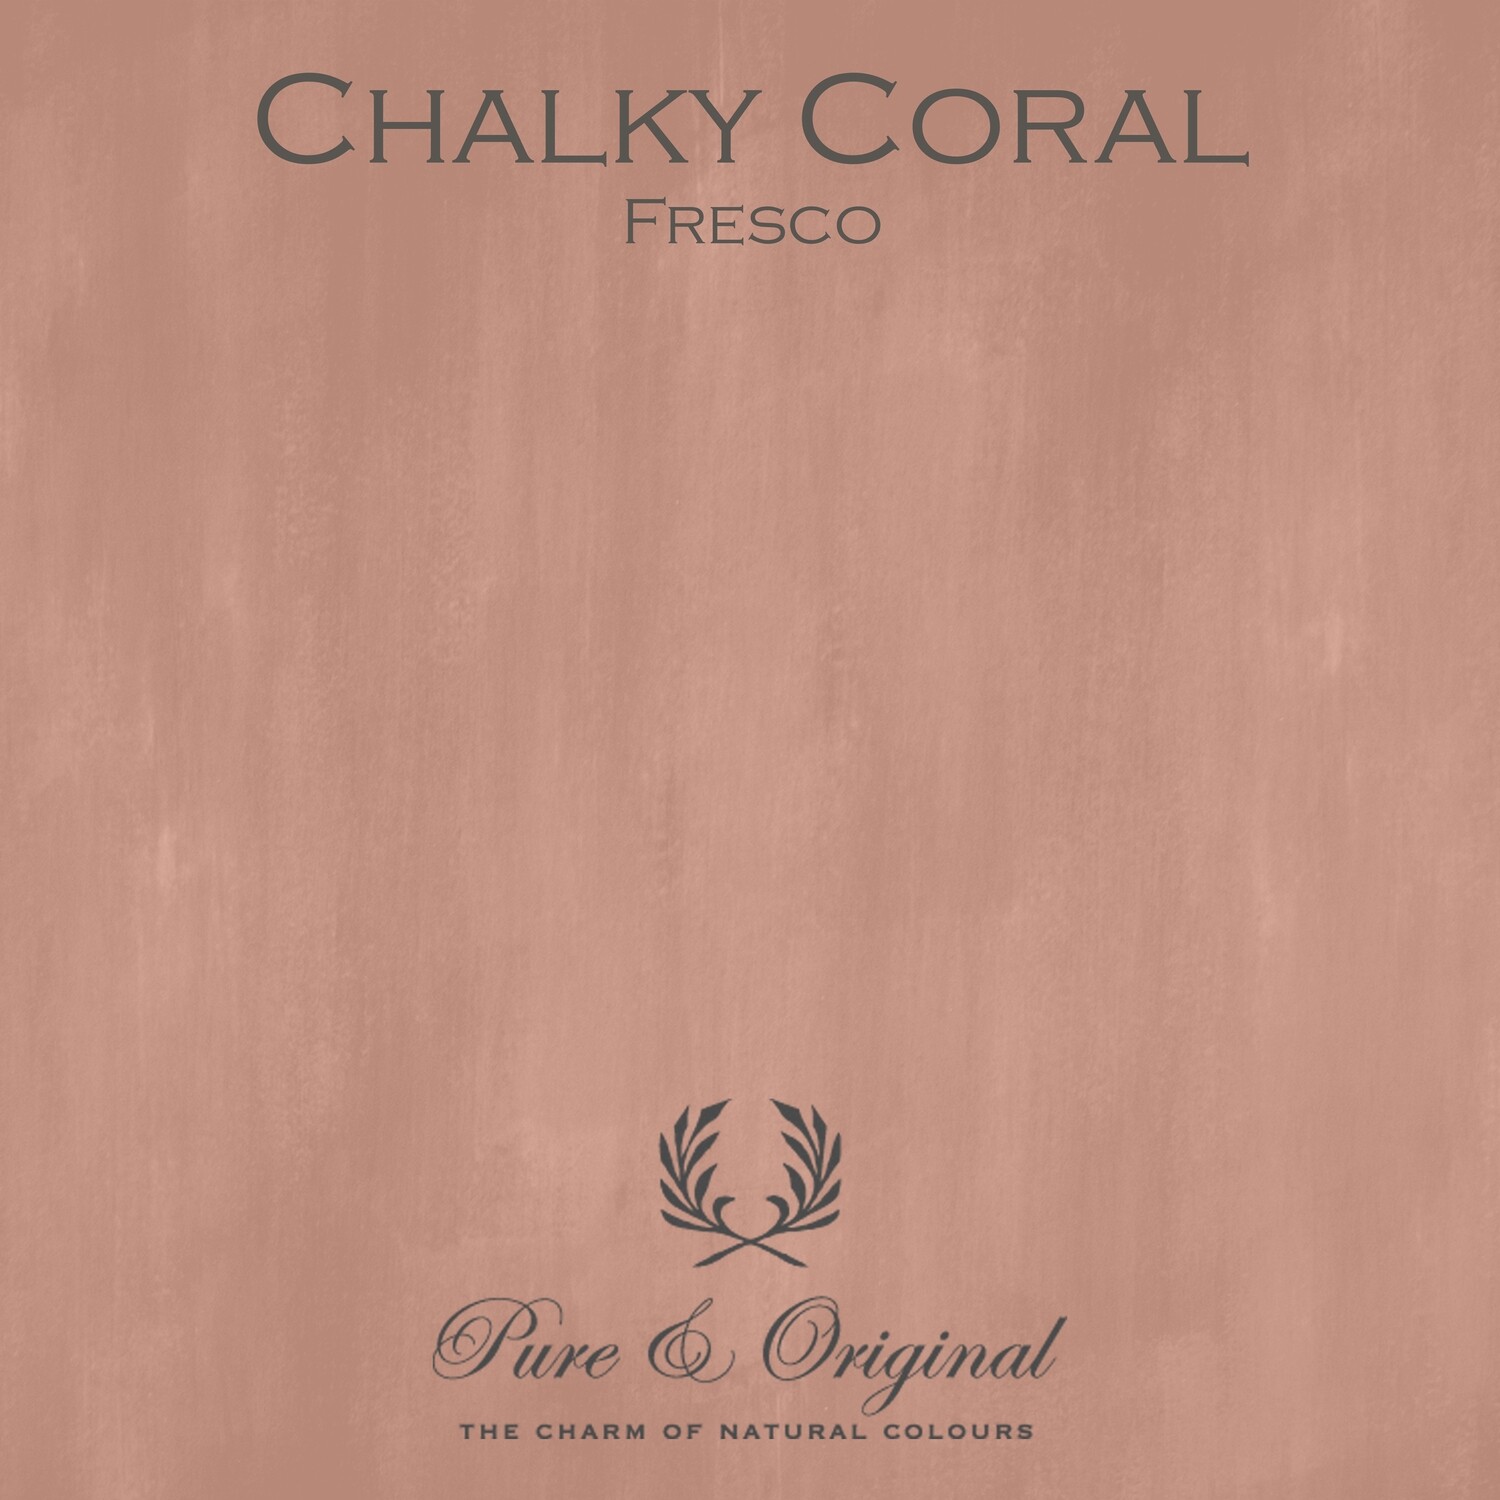 Chalky Coral Fresco